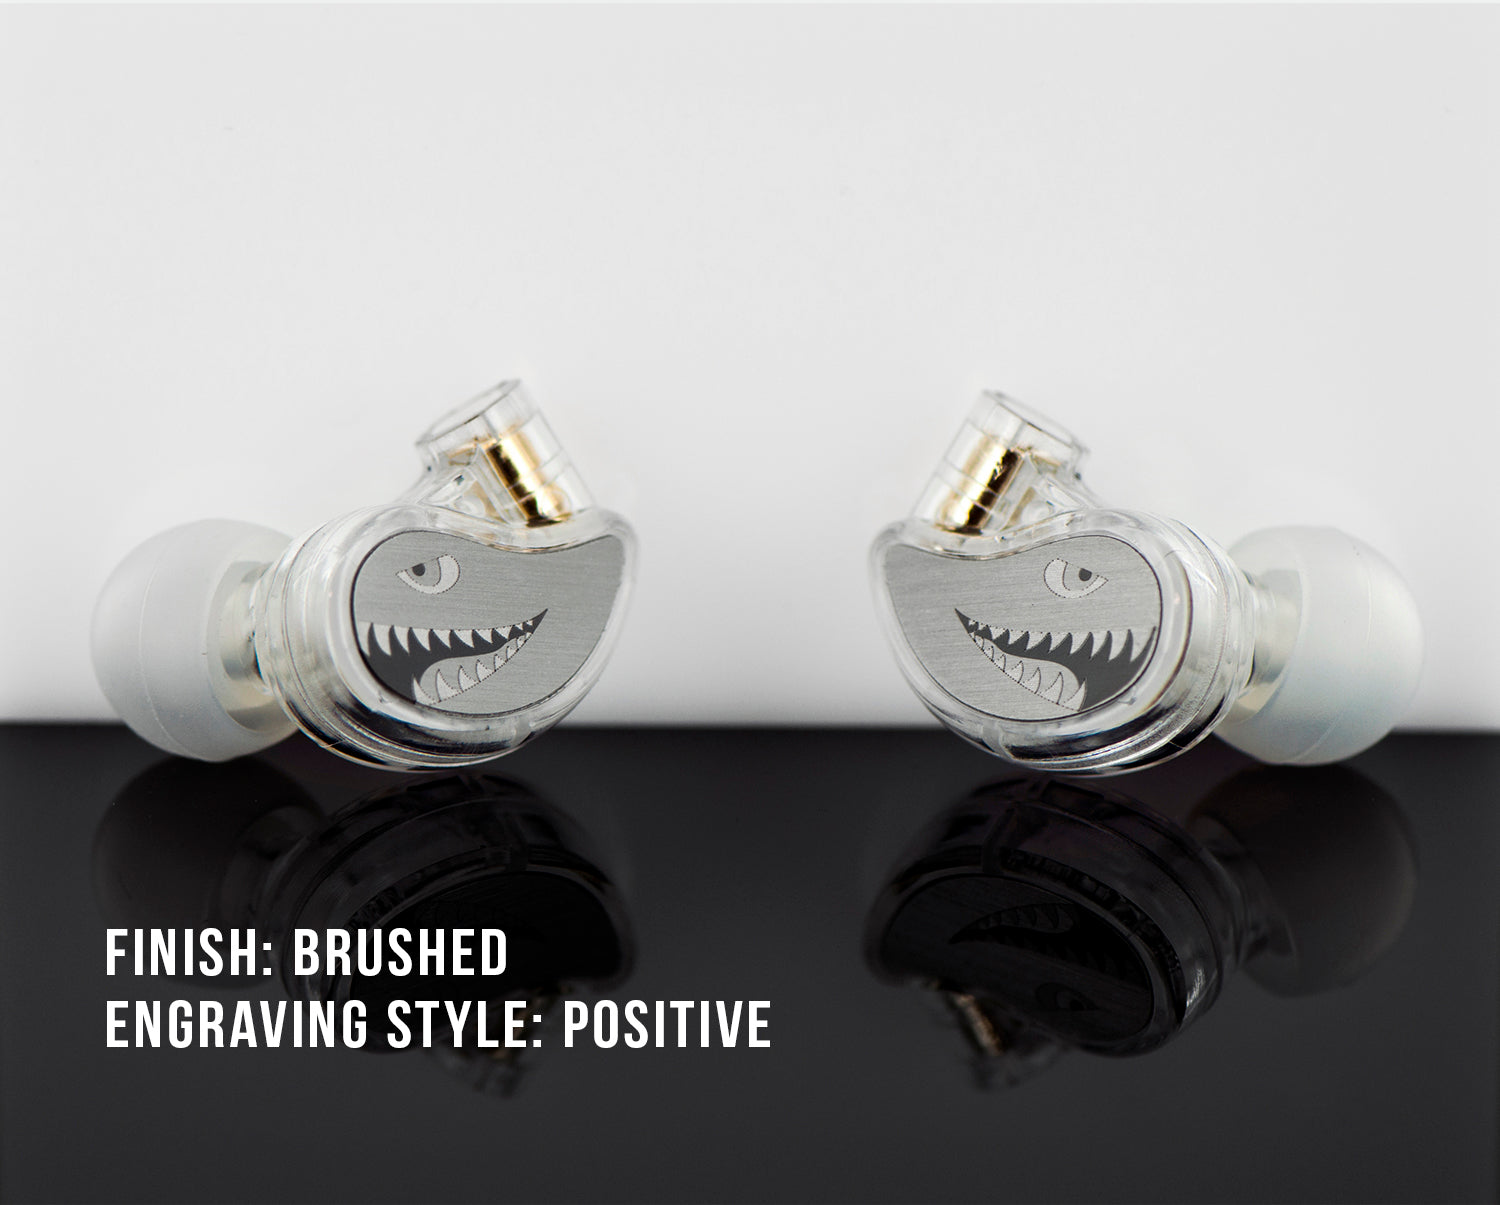 Two in-ear monitors with a brushed finish and shark face engravings, displayed on a reflective surface with text labels "finish: brushed" and "engraving style: positive".